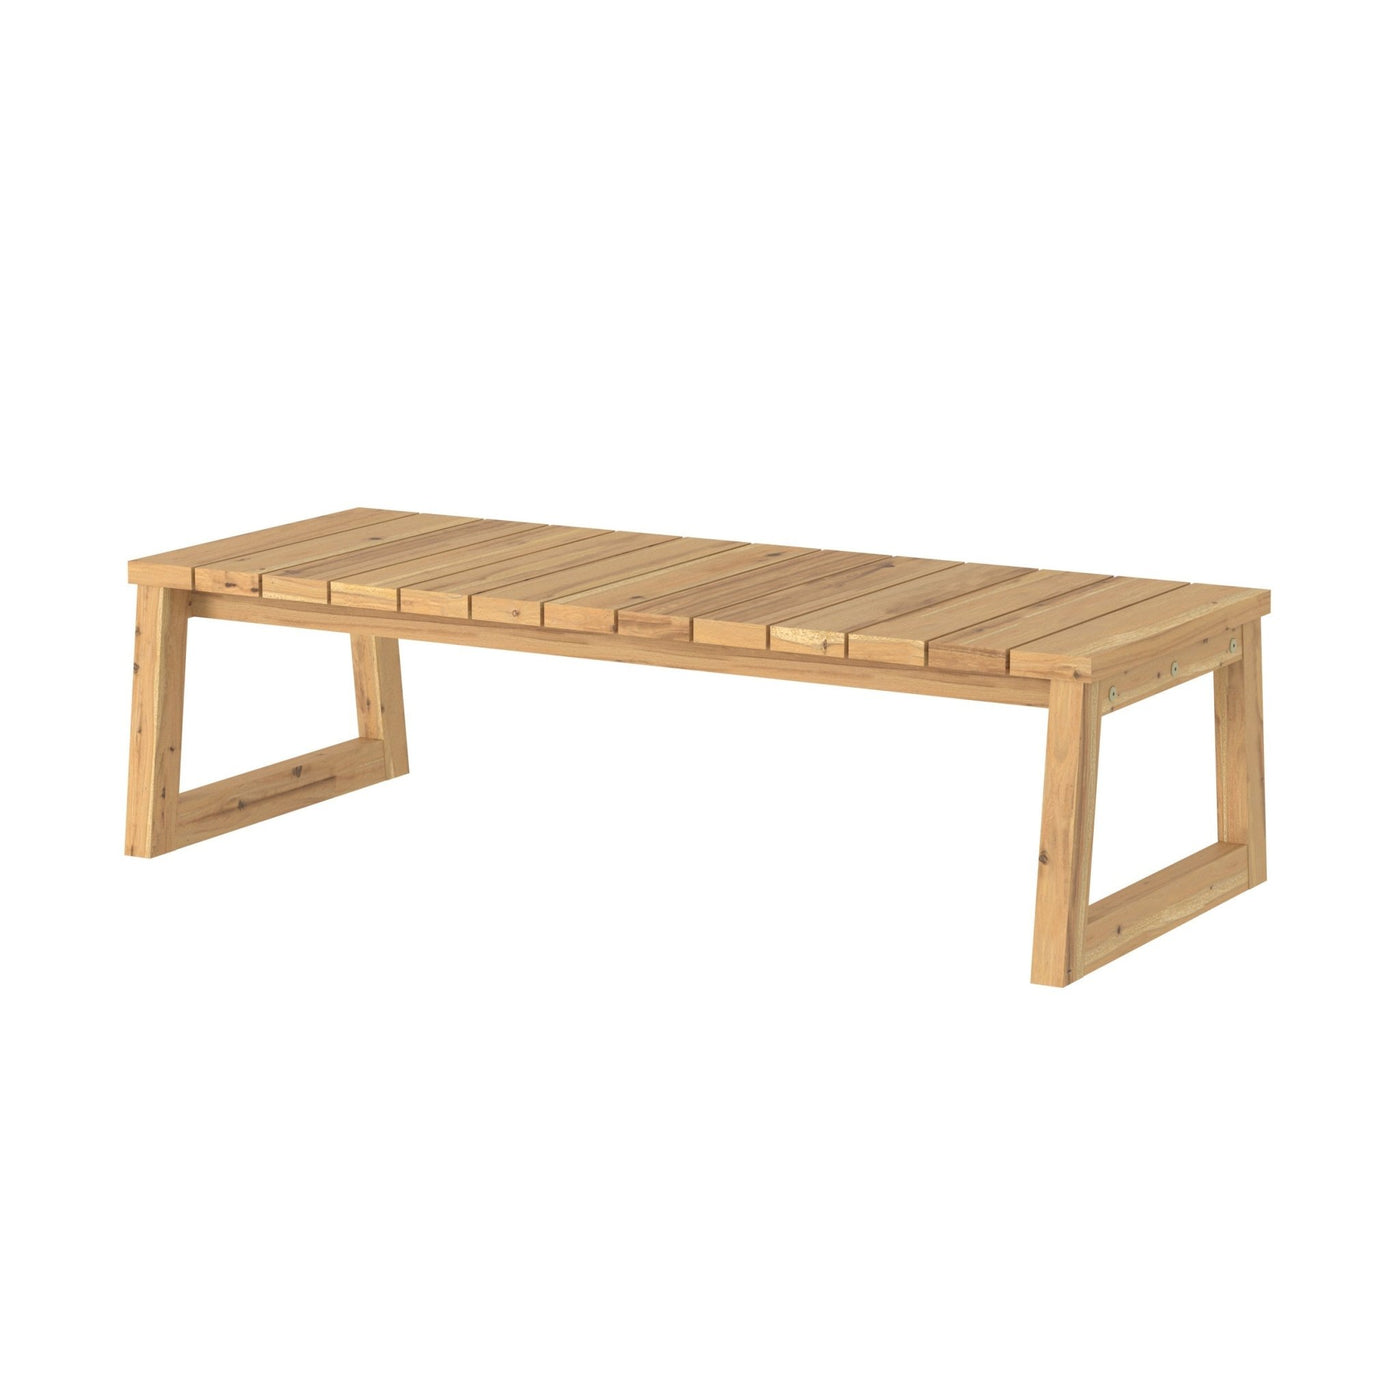 Cologne Modern Solid Wood Outdoor Slat-Top Coffee Table - Sweet Water Decor - Outdoor Table